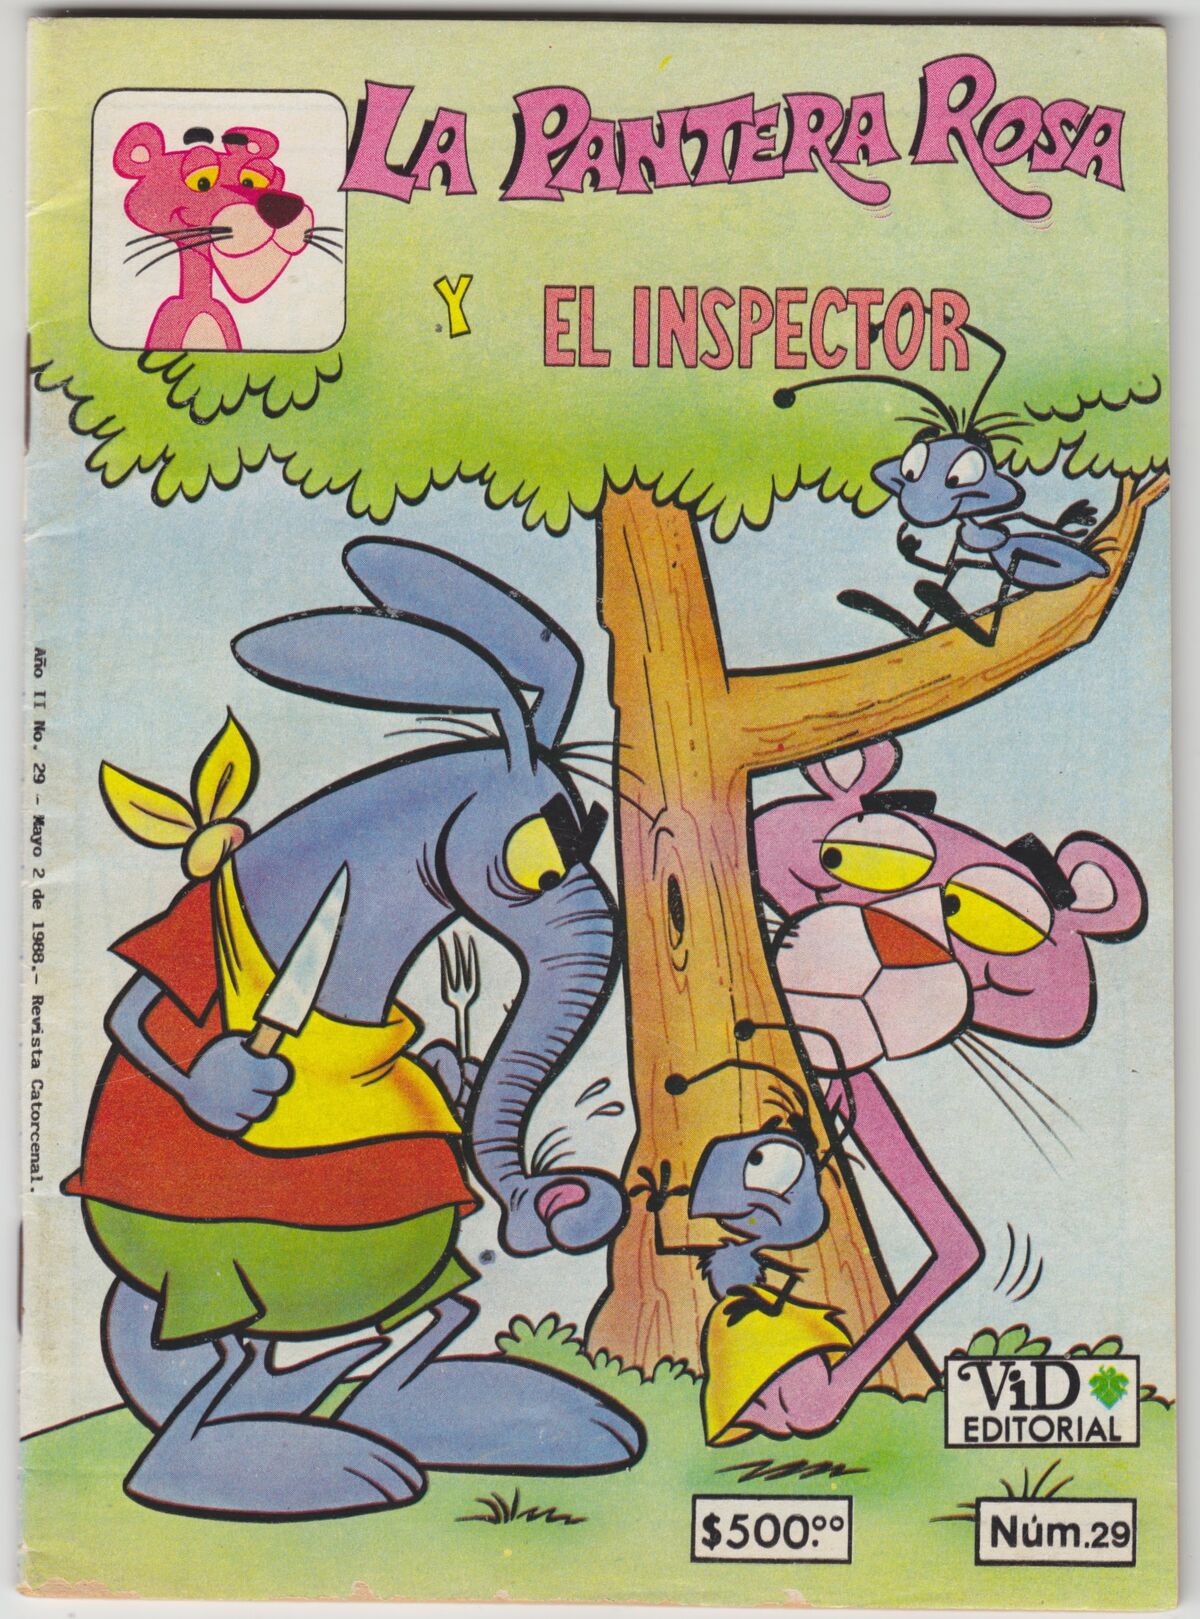 LA PANTERA ROSA #9 VID MEXICAN COMIC MADE IN MEXICO THE PINK PANTHER